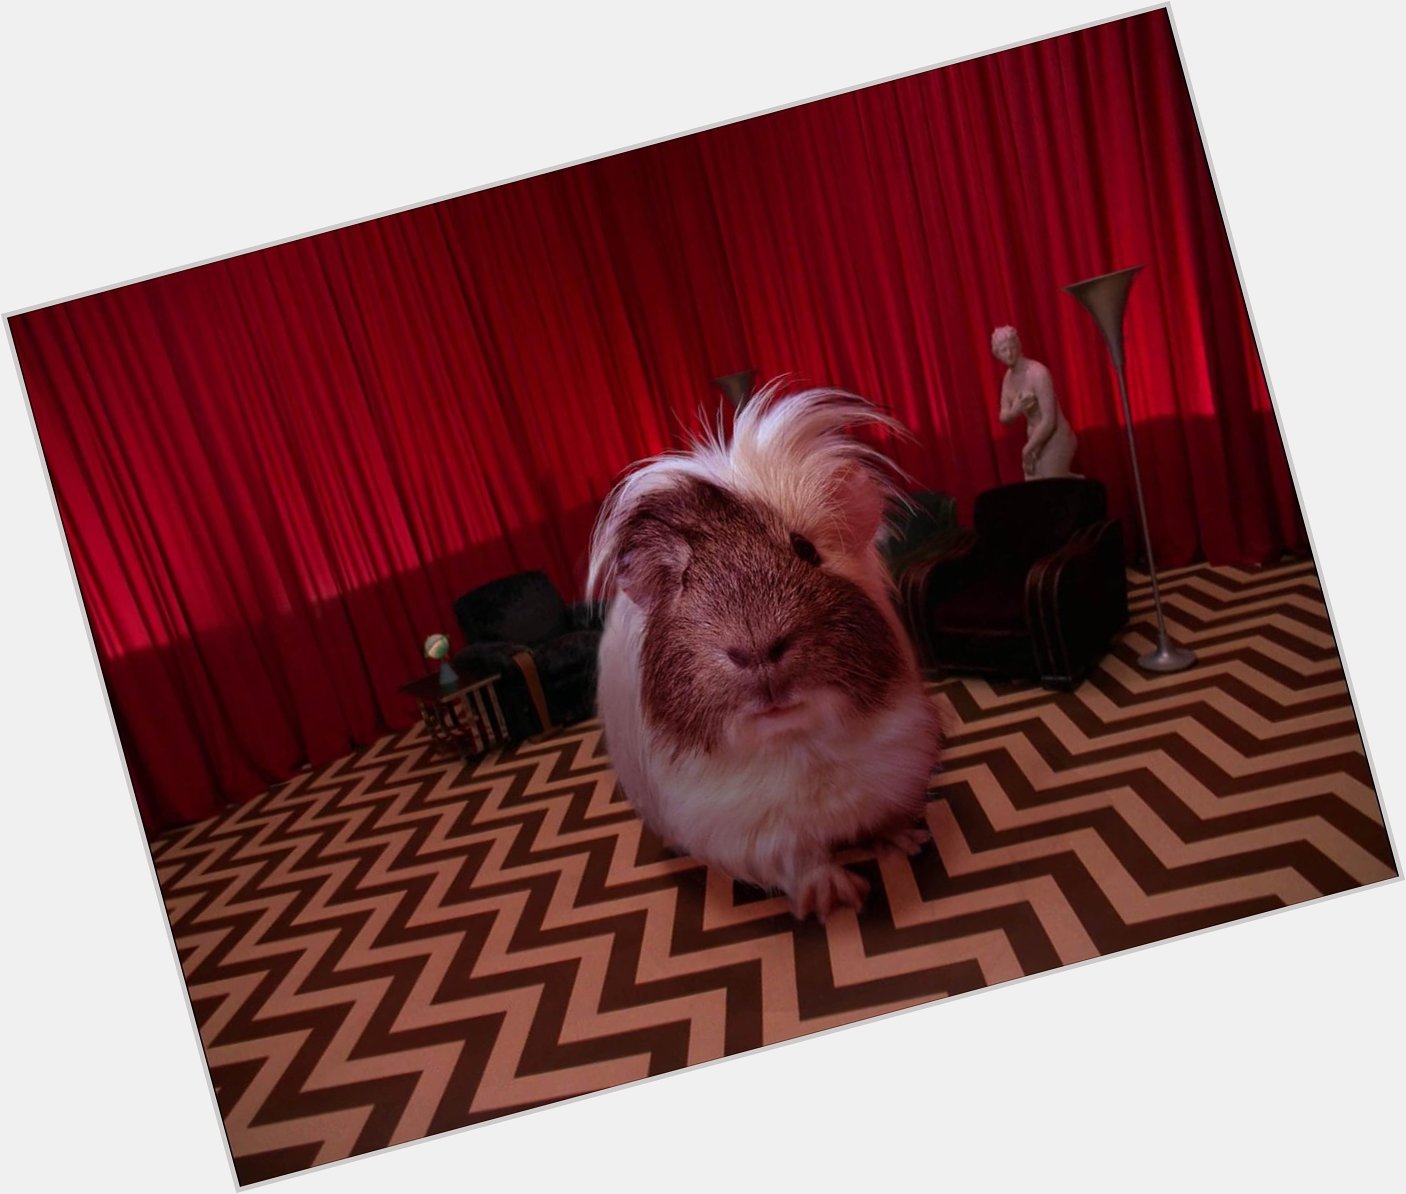 A belated Happy Birthday to David Lynch!

( featuring our beloved Furrito, Ingmar Superstar ) 